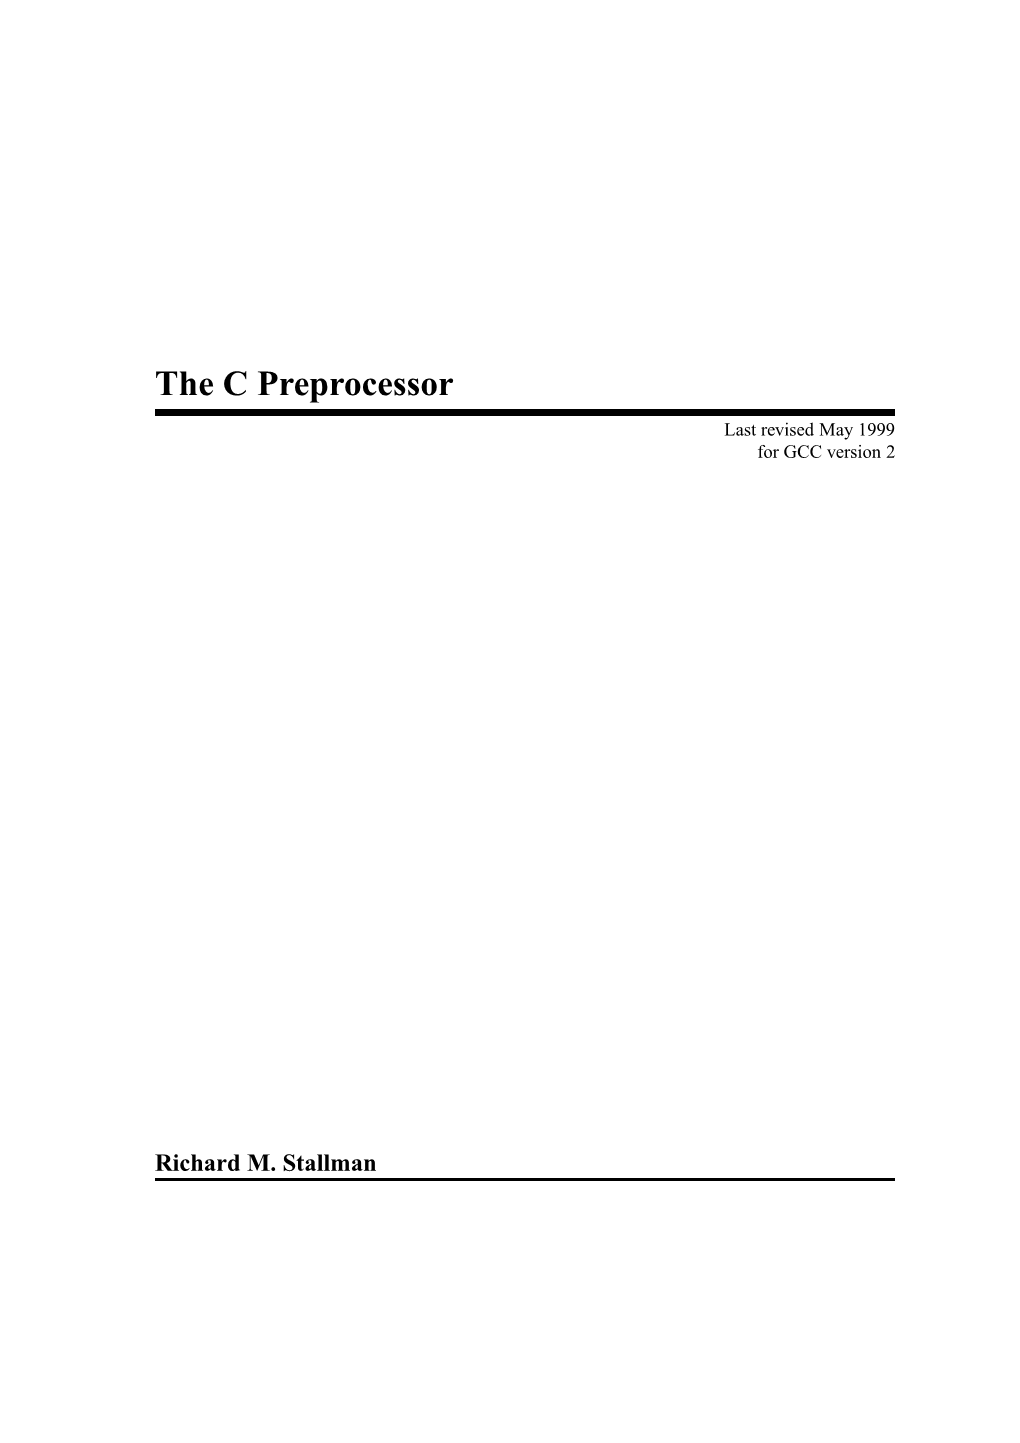 The C Preprocessor Last Revised May 1999 for GCC Version 2